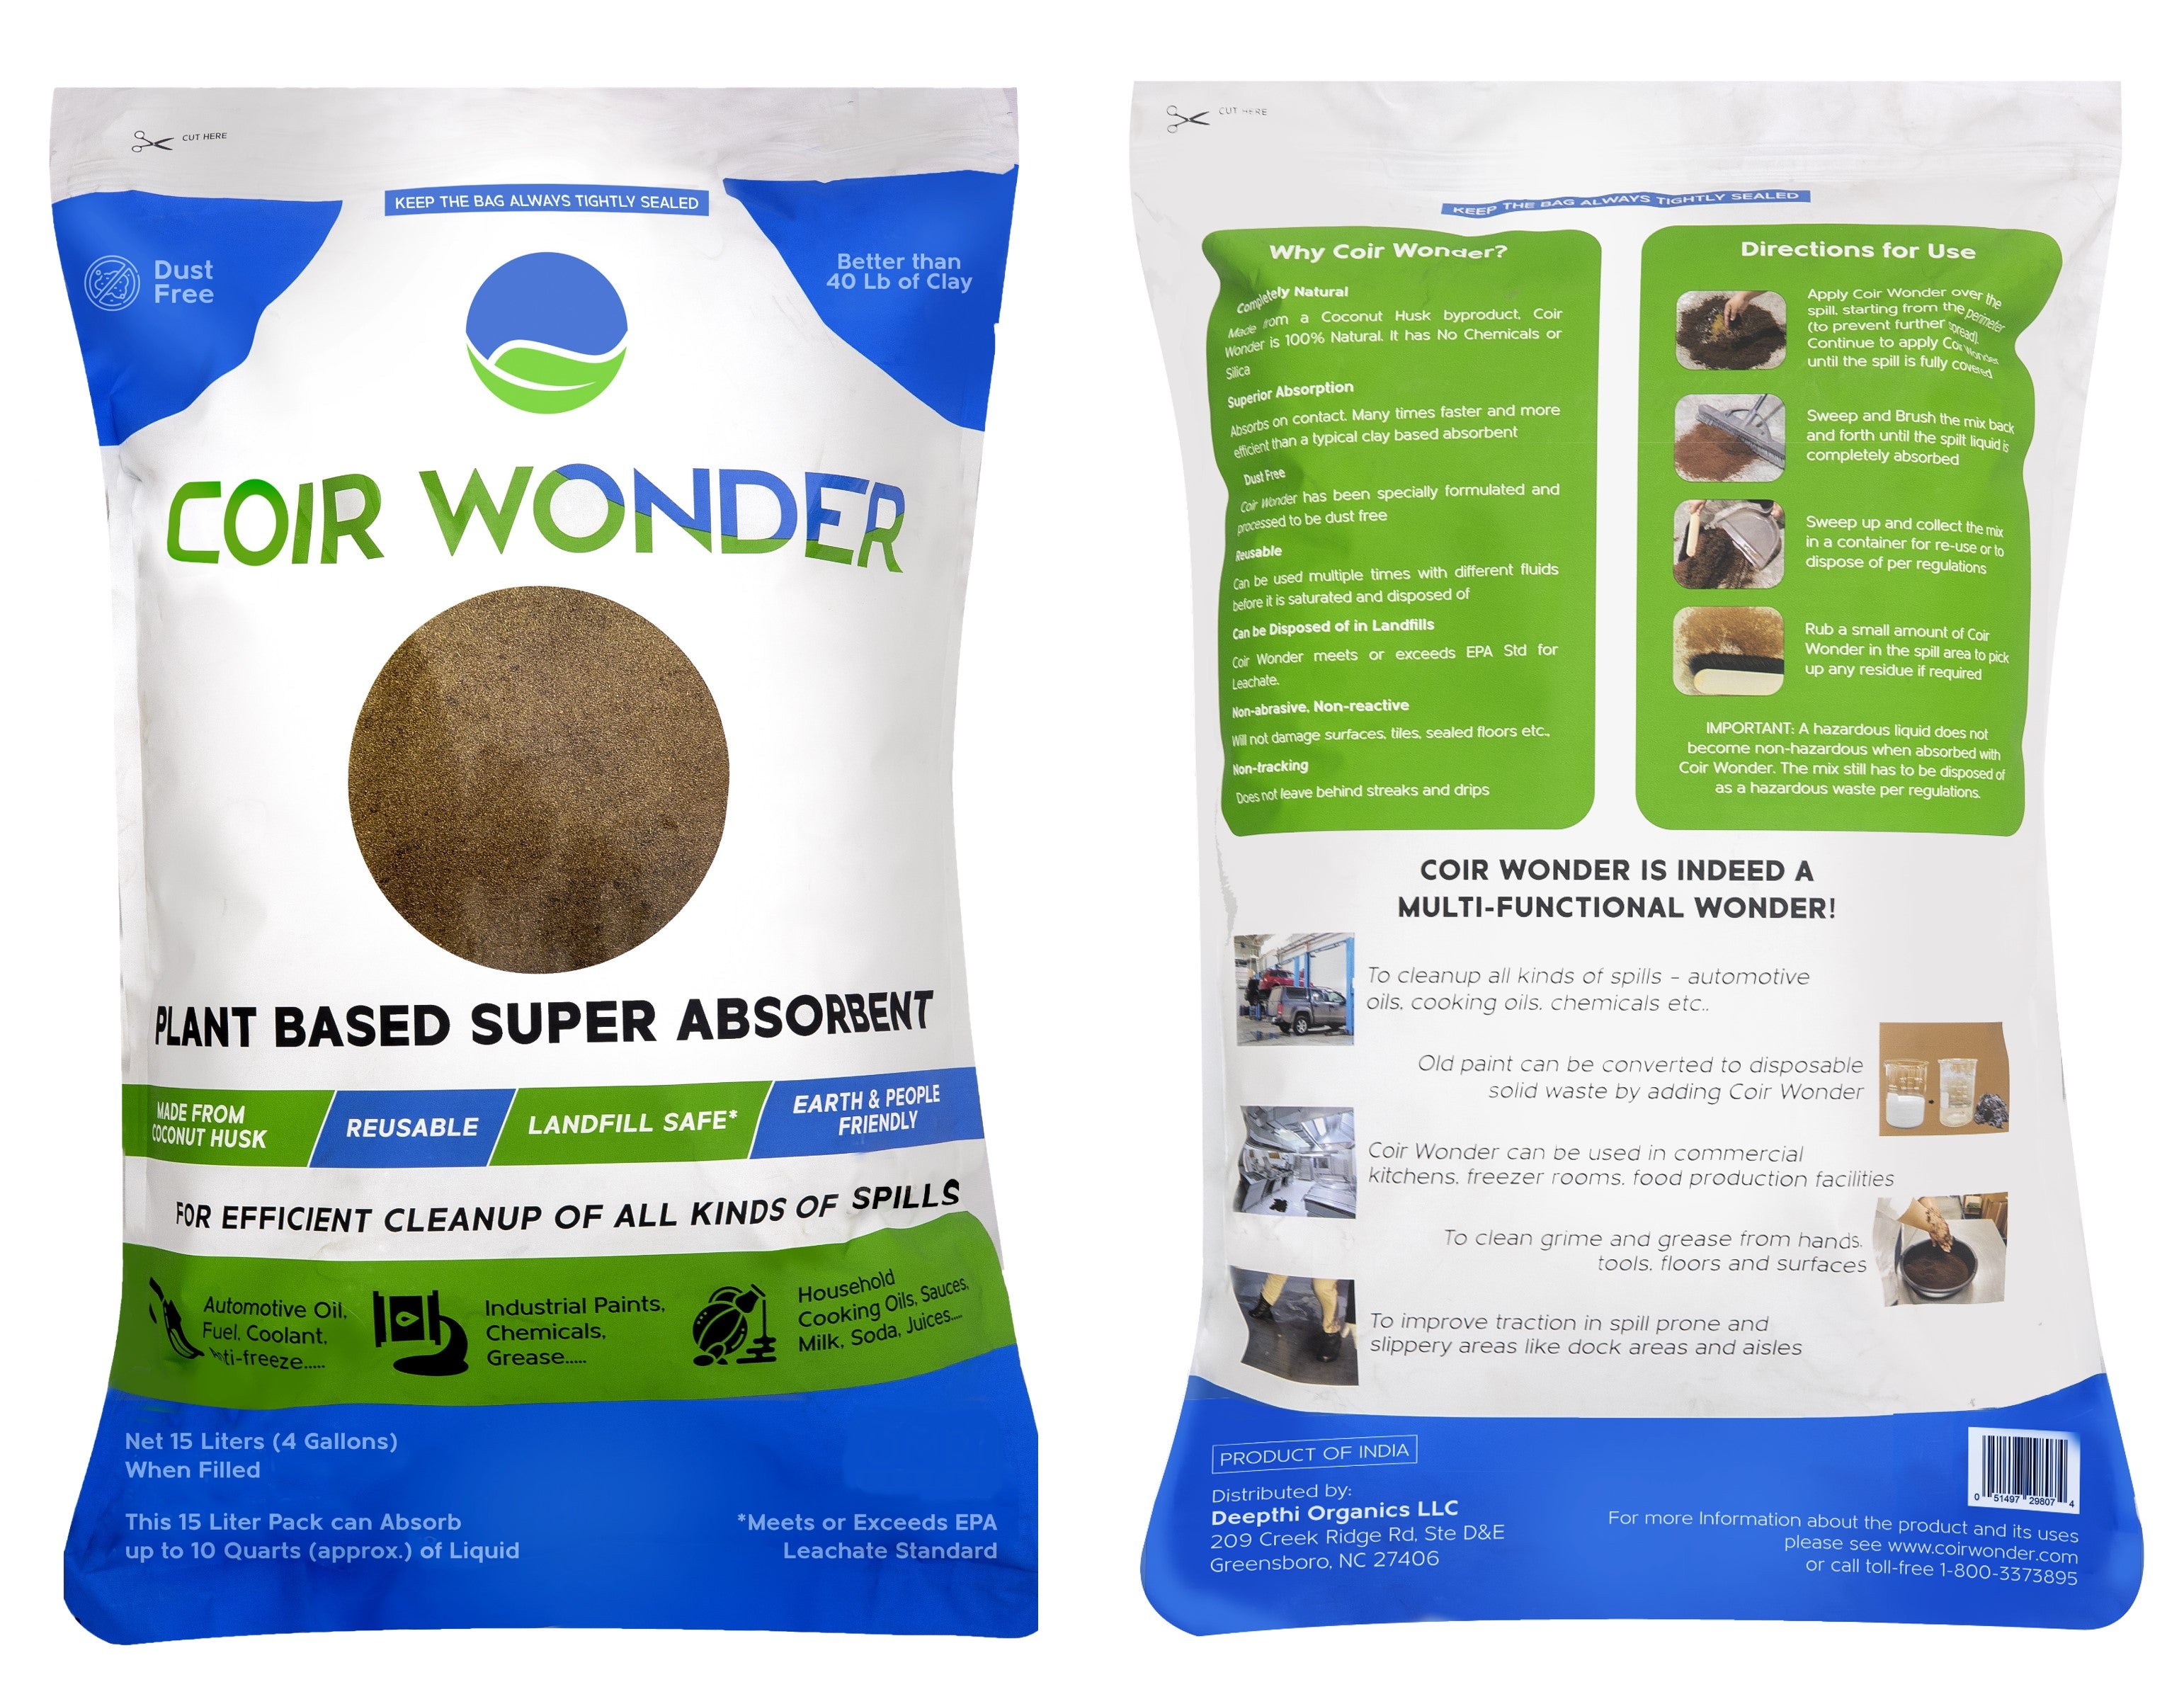 Coir Wonder 3-in-1 Oil Absorbent, Paint Hardener, No Heat Cooking Oil Solidifier and Sweeping Compound